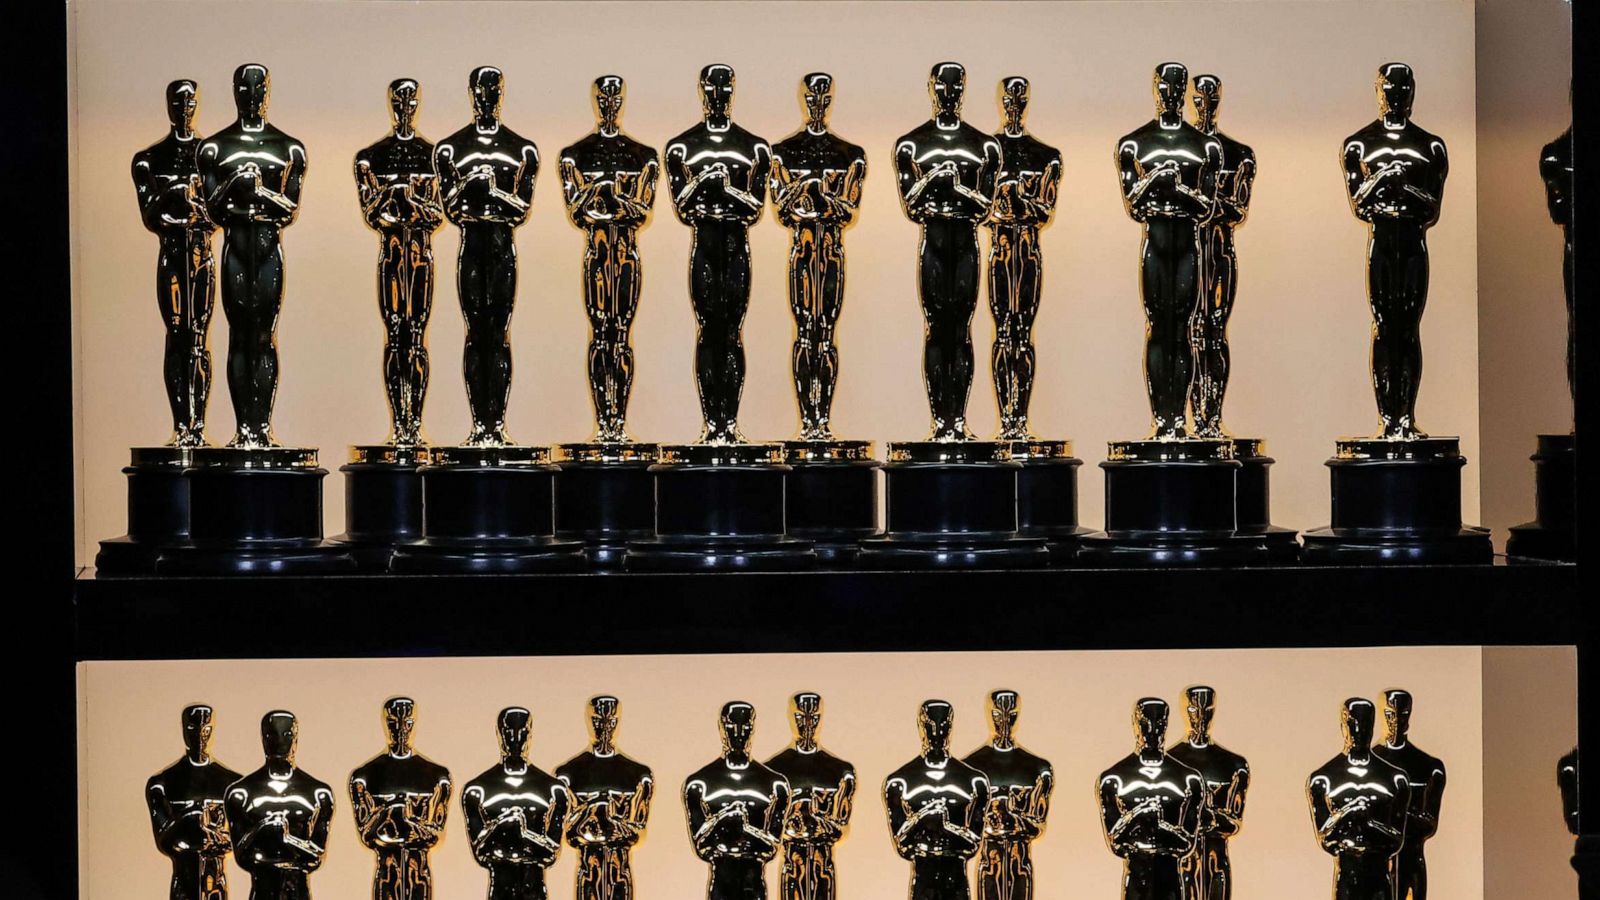 Oscars 2021: How To Watch, Host, Nominees And Predictions